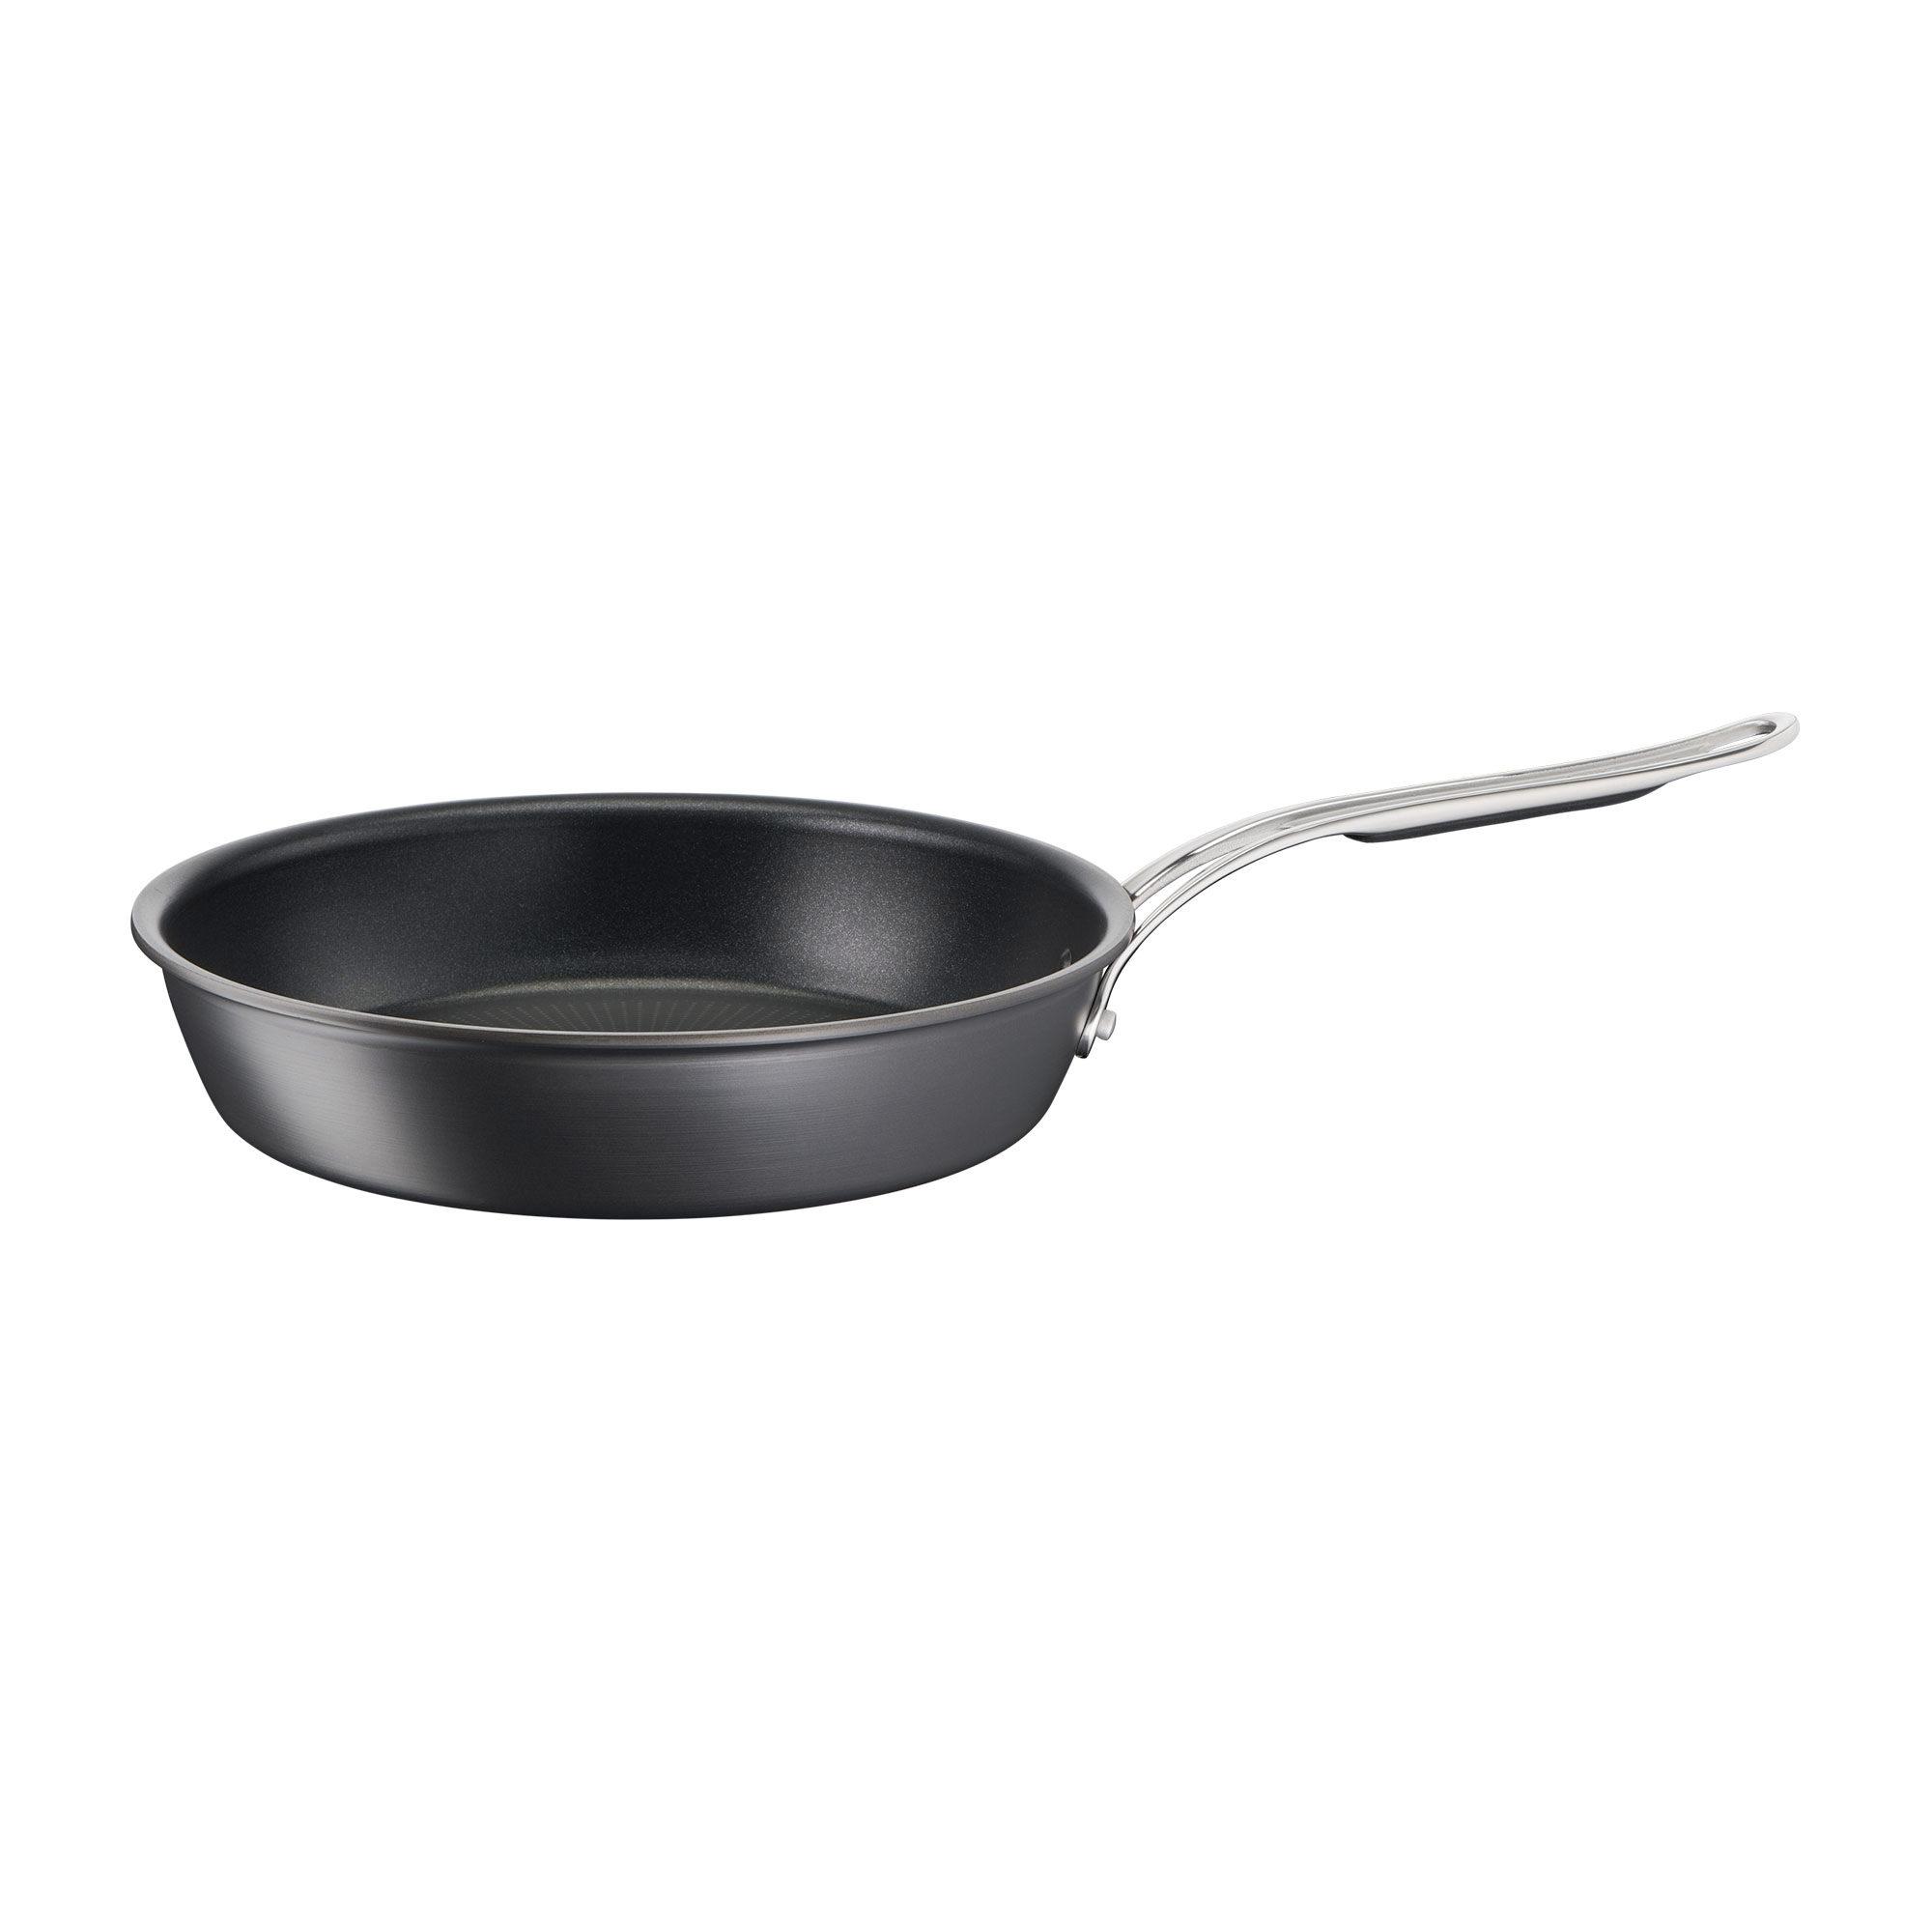 Jamie Oliver by Tefal Cook's Classic Hard Anodised Induction Frypan 24cm Image 3